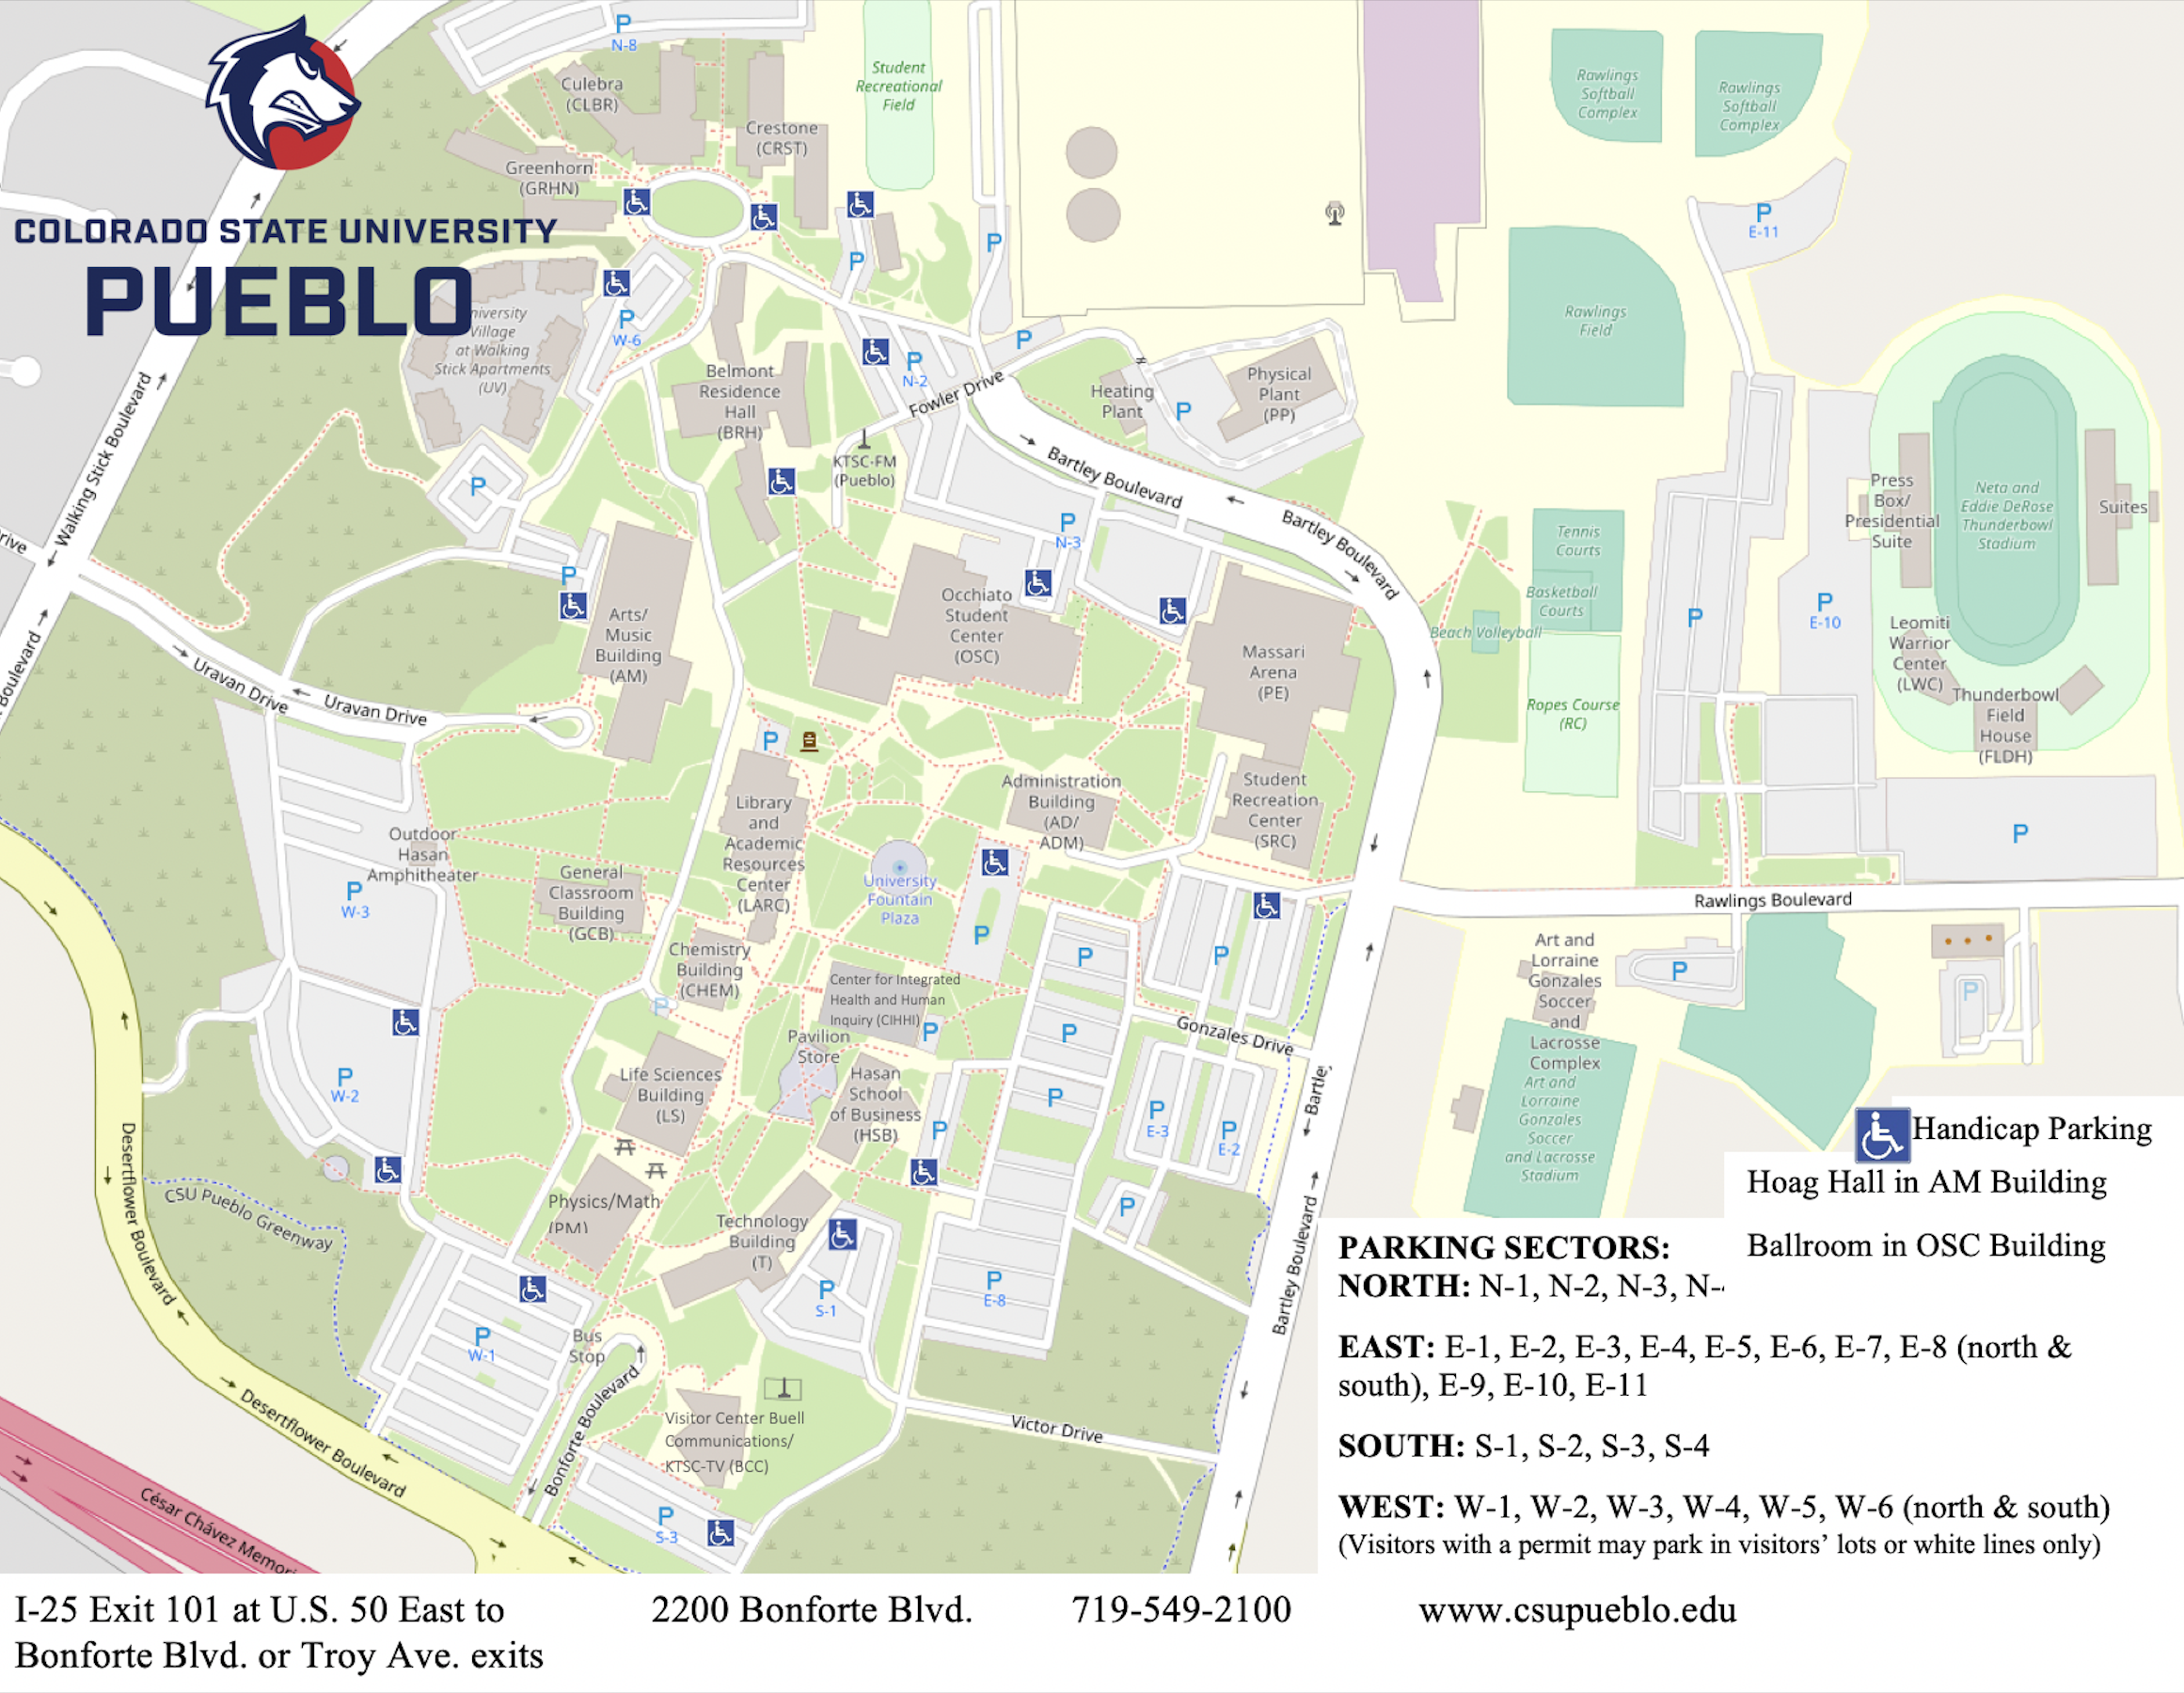 picture of the entire campus map